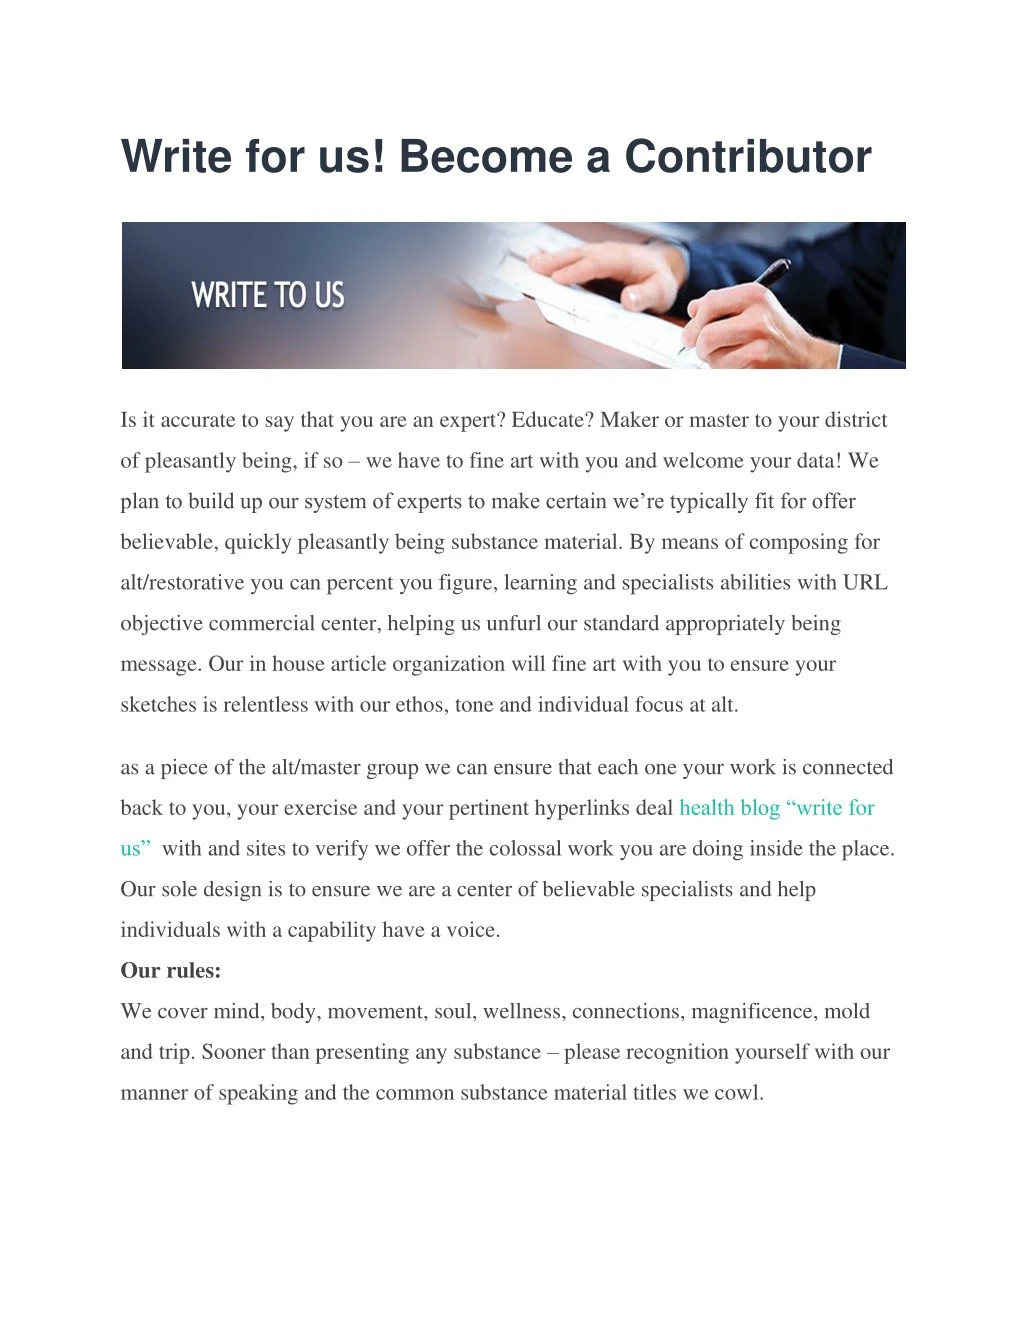 write for us become a contributor